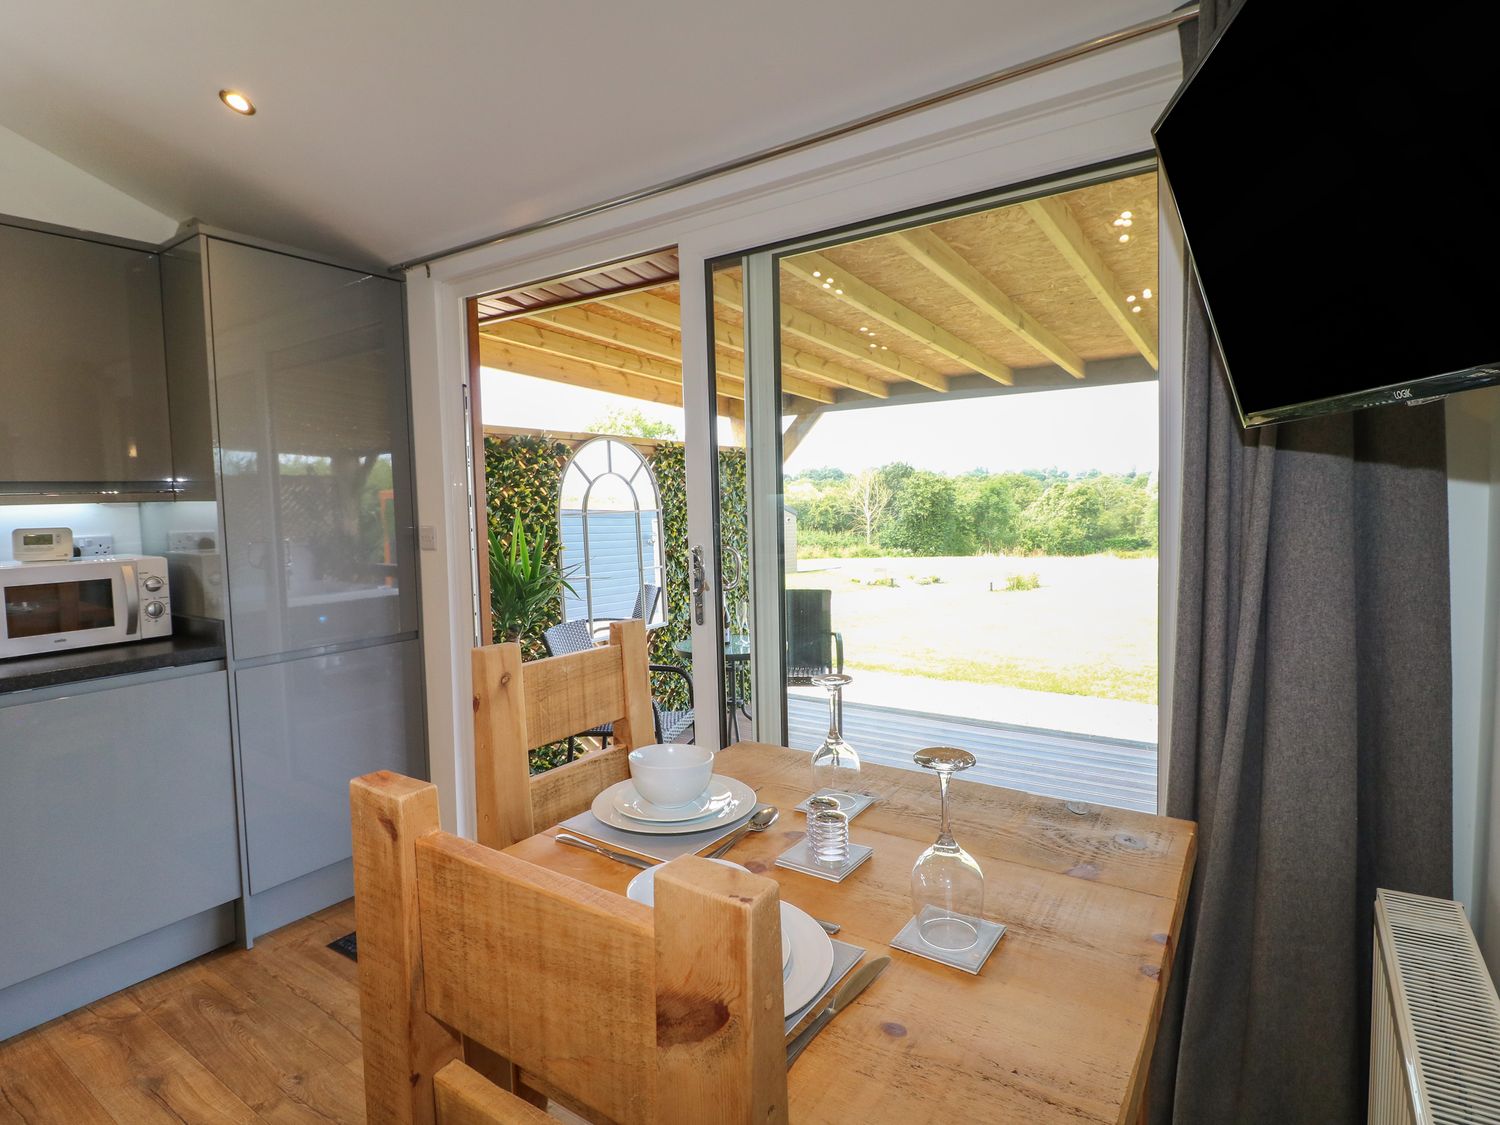 Birch, Donisthorpe, Leicestershire. Adult-only, one-bedroom lodge with hot tub and stylish interior.